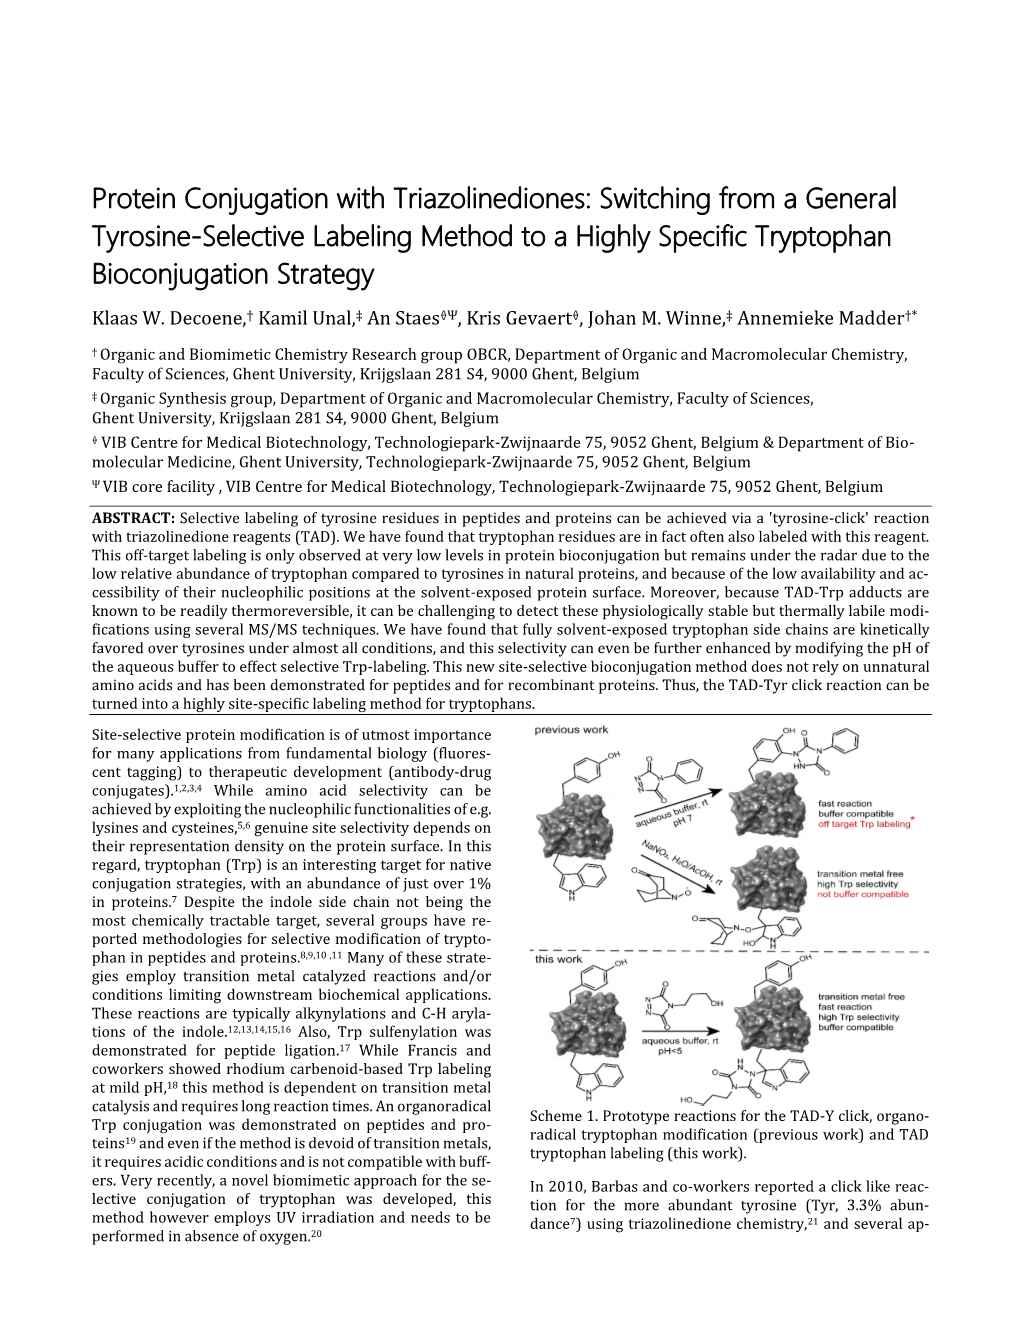 Protein Conjugation with Triazolinediones: Switching from a General Tyrosine-Selective Labeling Method to a Highly Specific Tryptophan Bioconjugation Strategy Klaas W